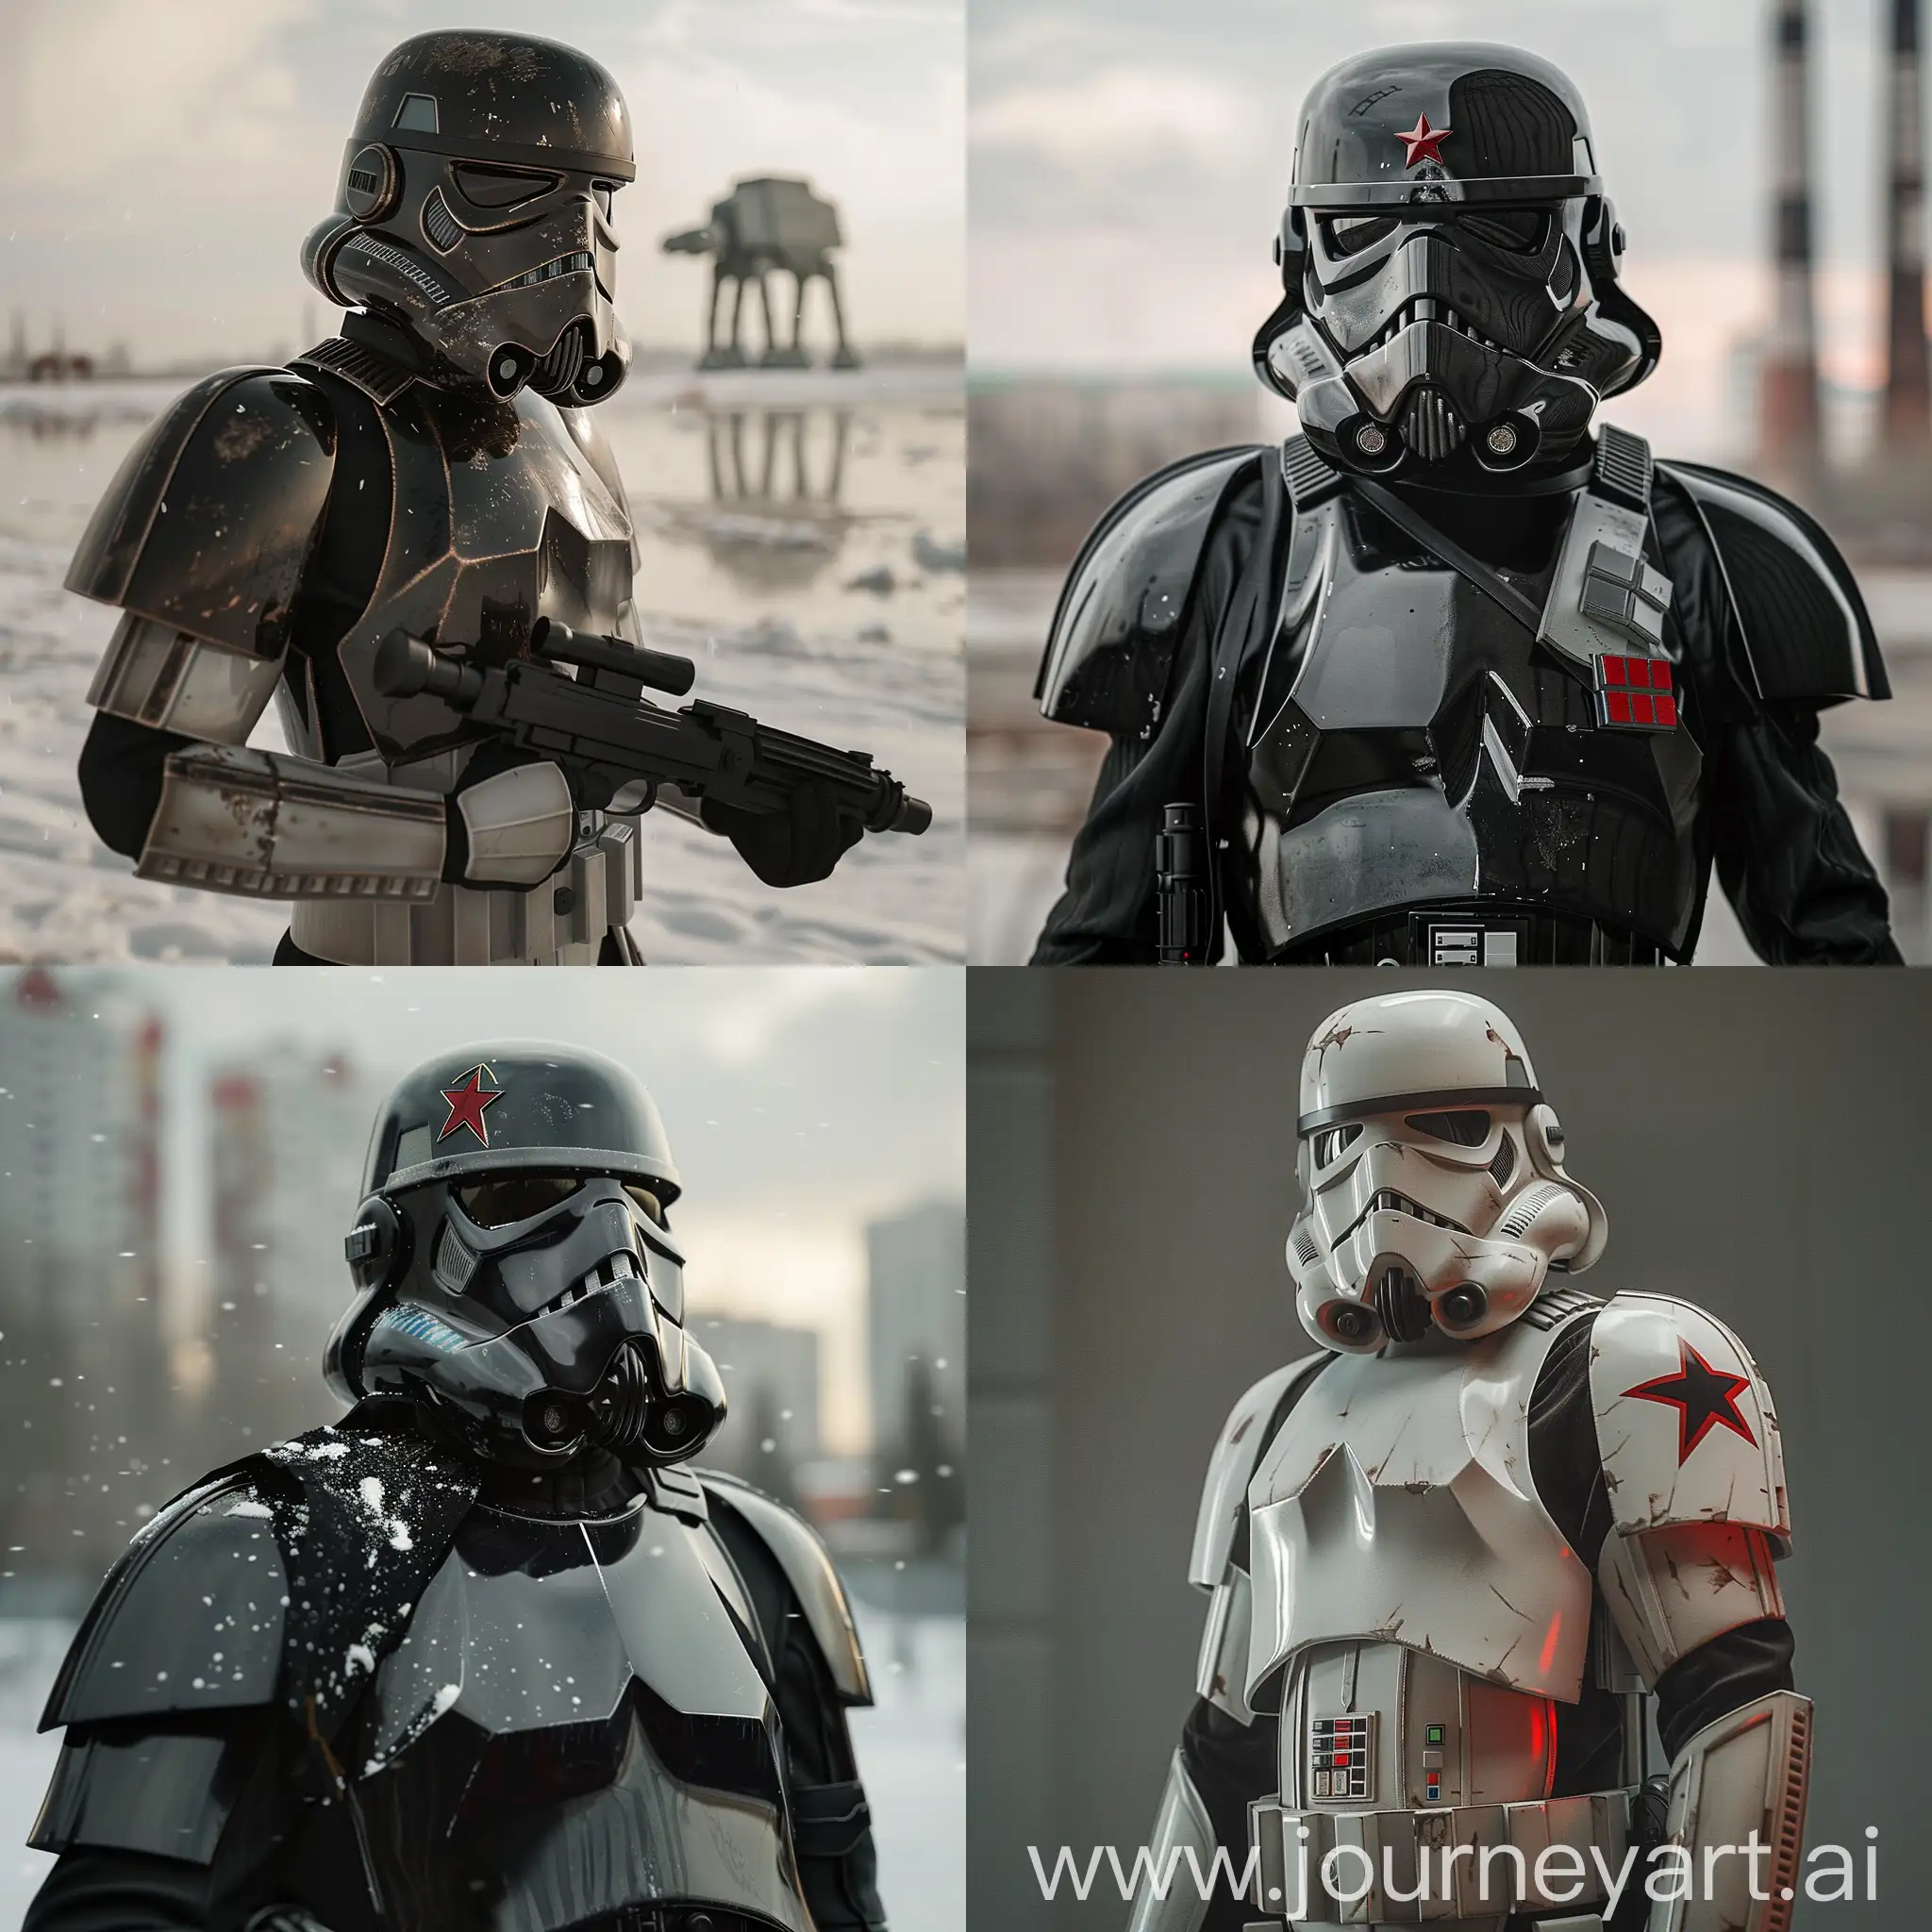 Generate a photo-realistic image of a star wars deathtrooper that works for soviet russia